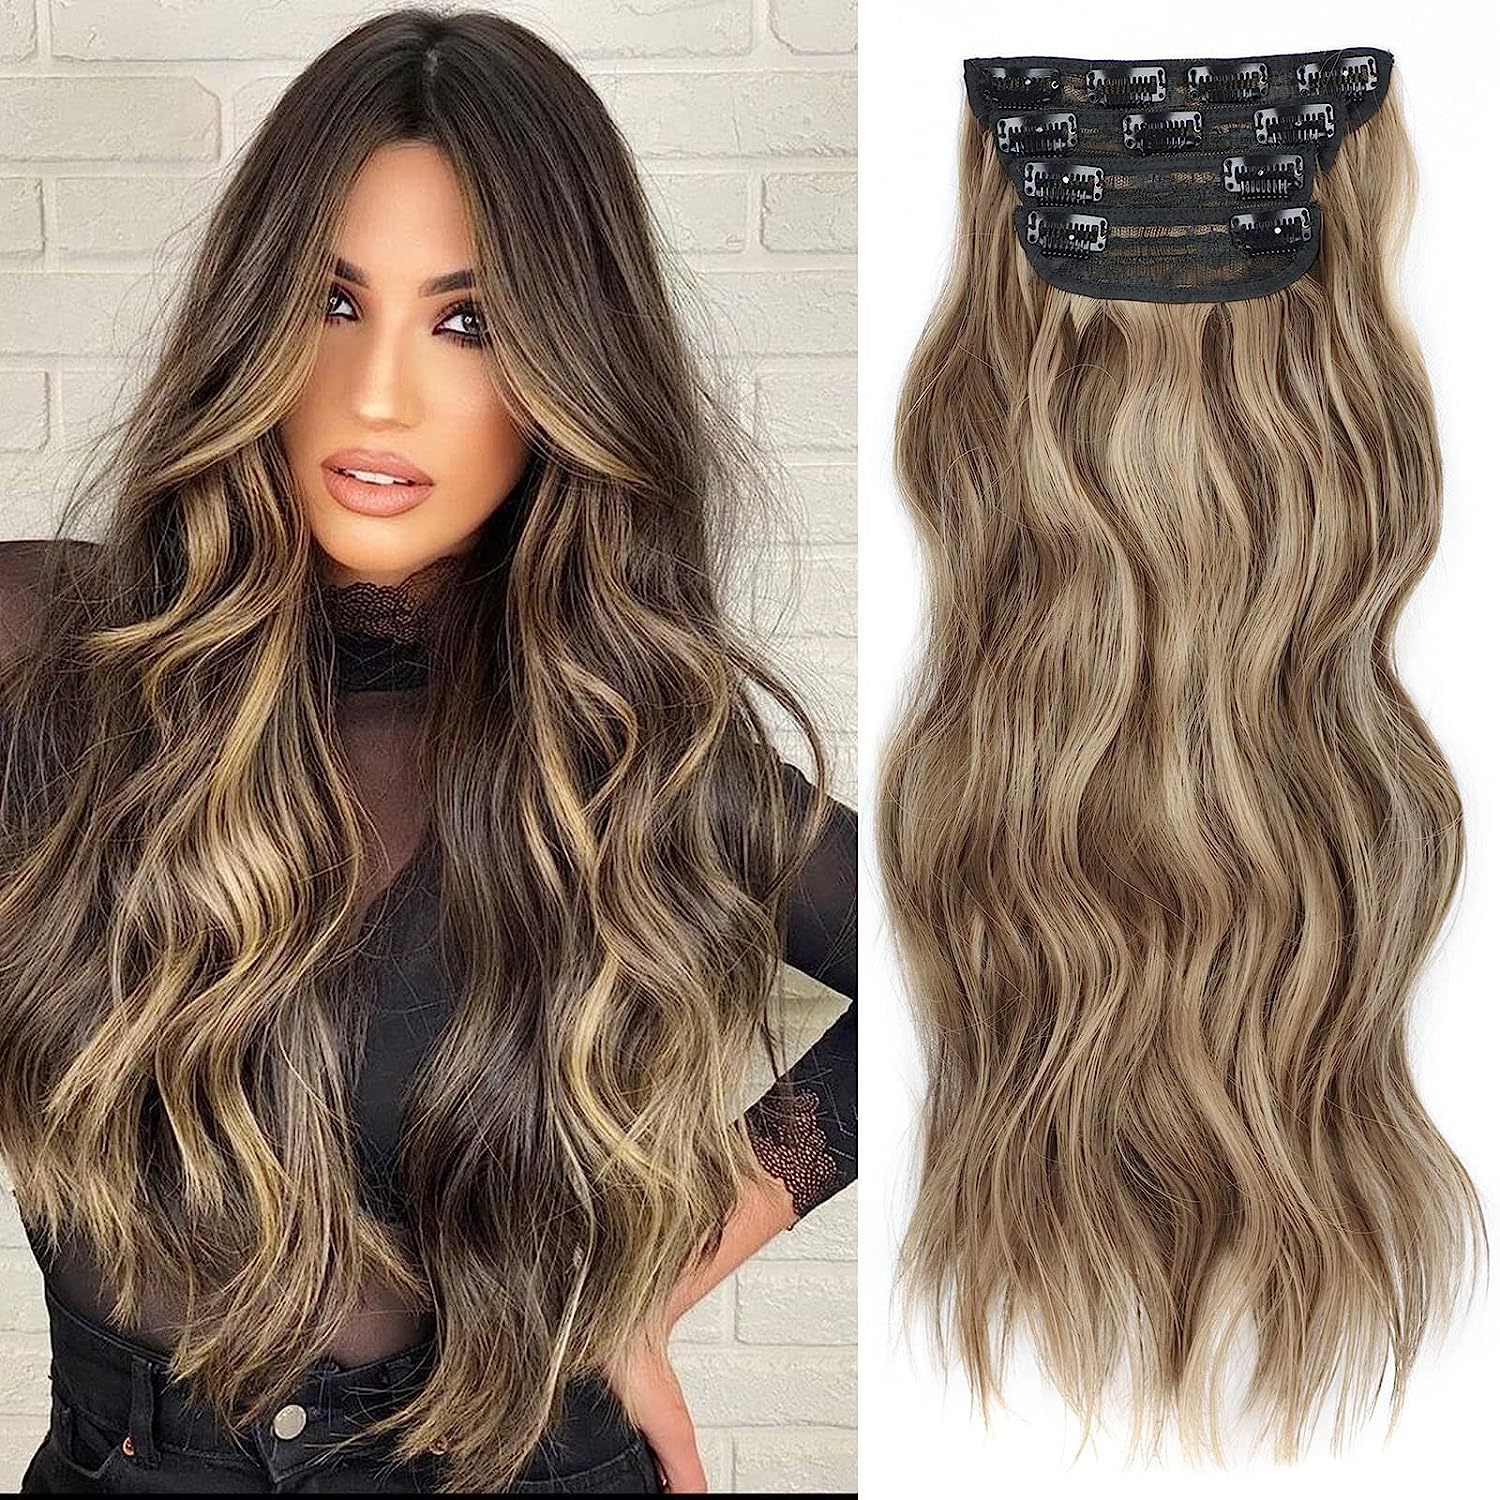 Not Tangled 20 Inch Long Wavy Synthetic Hair [...]